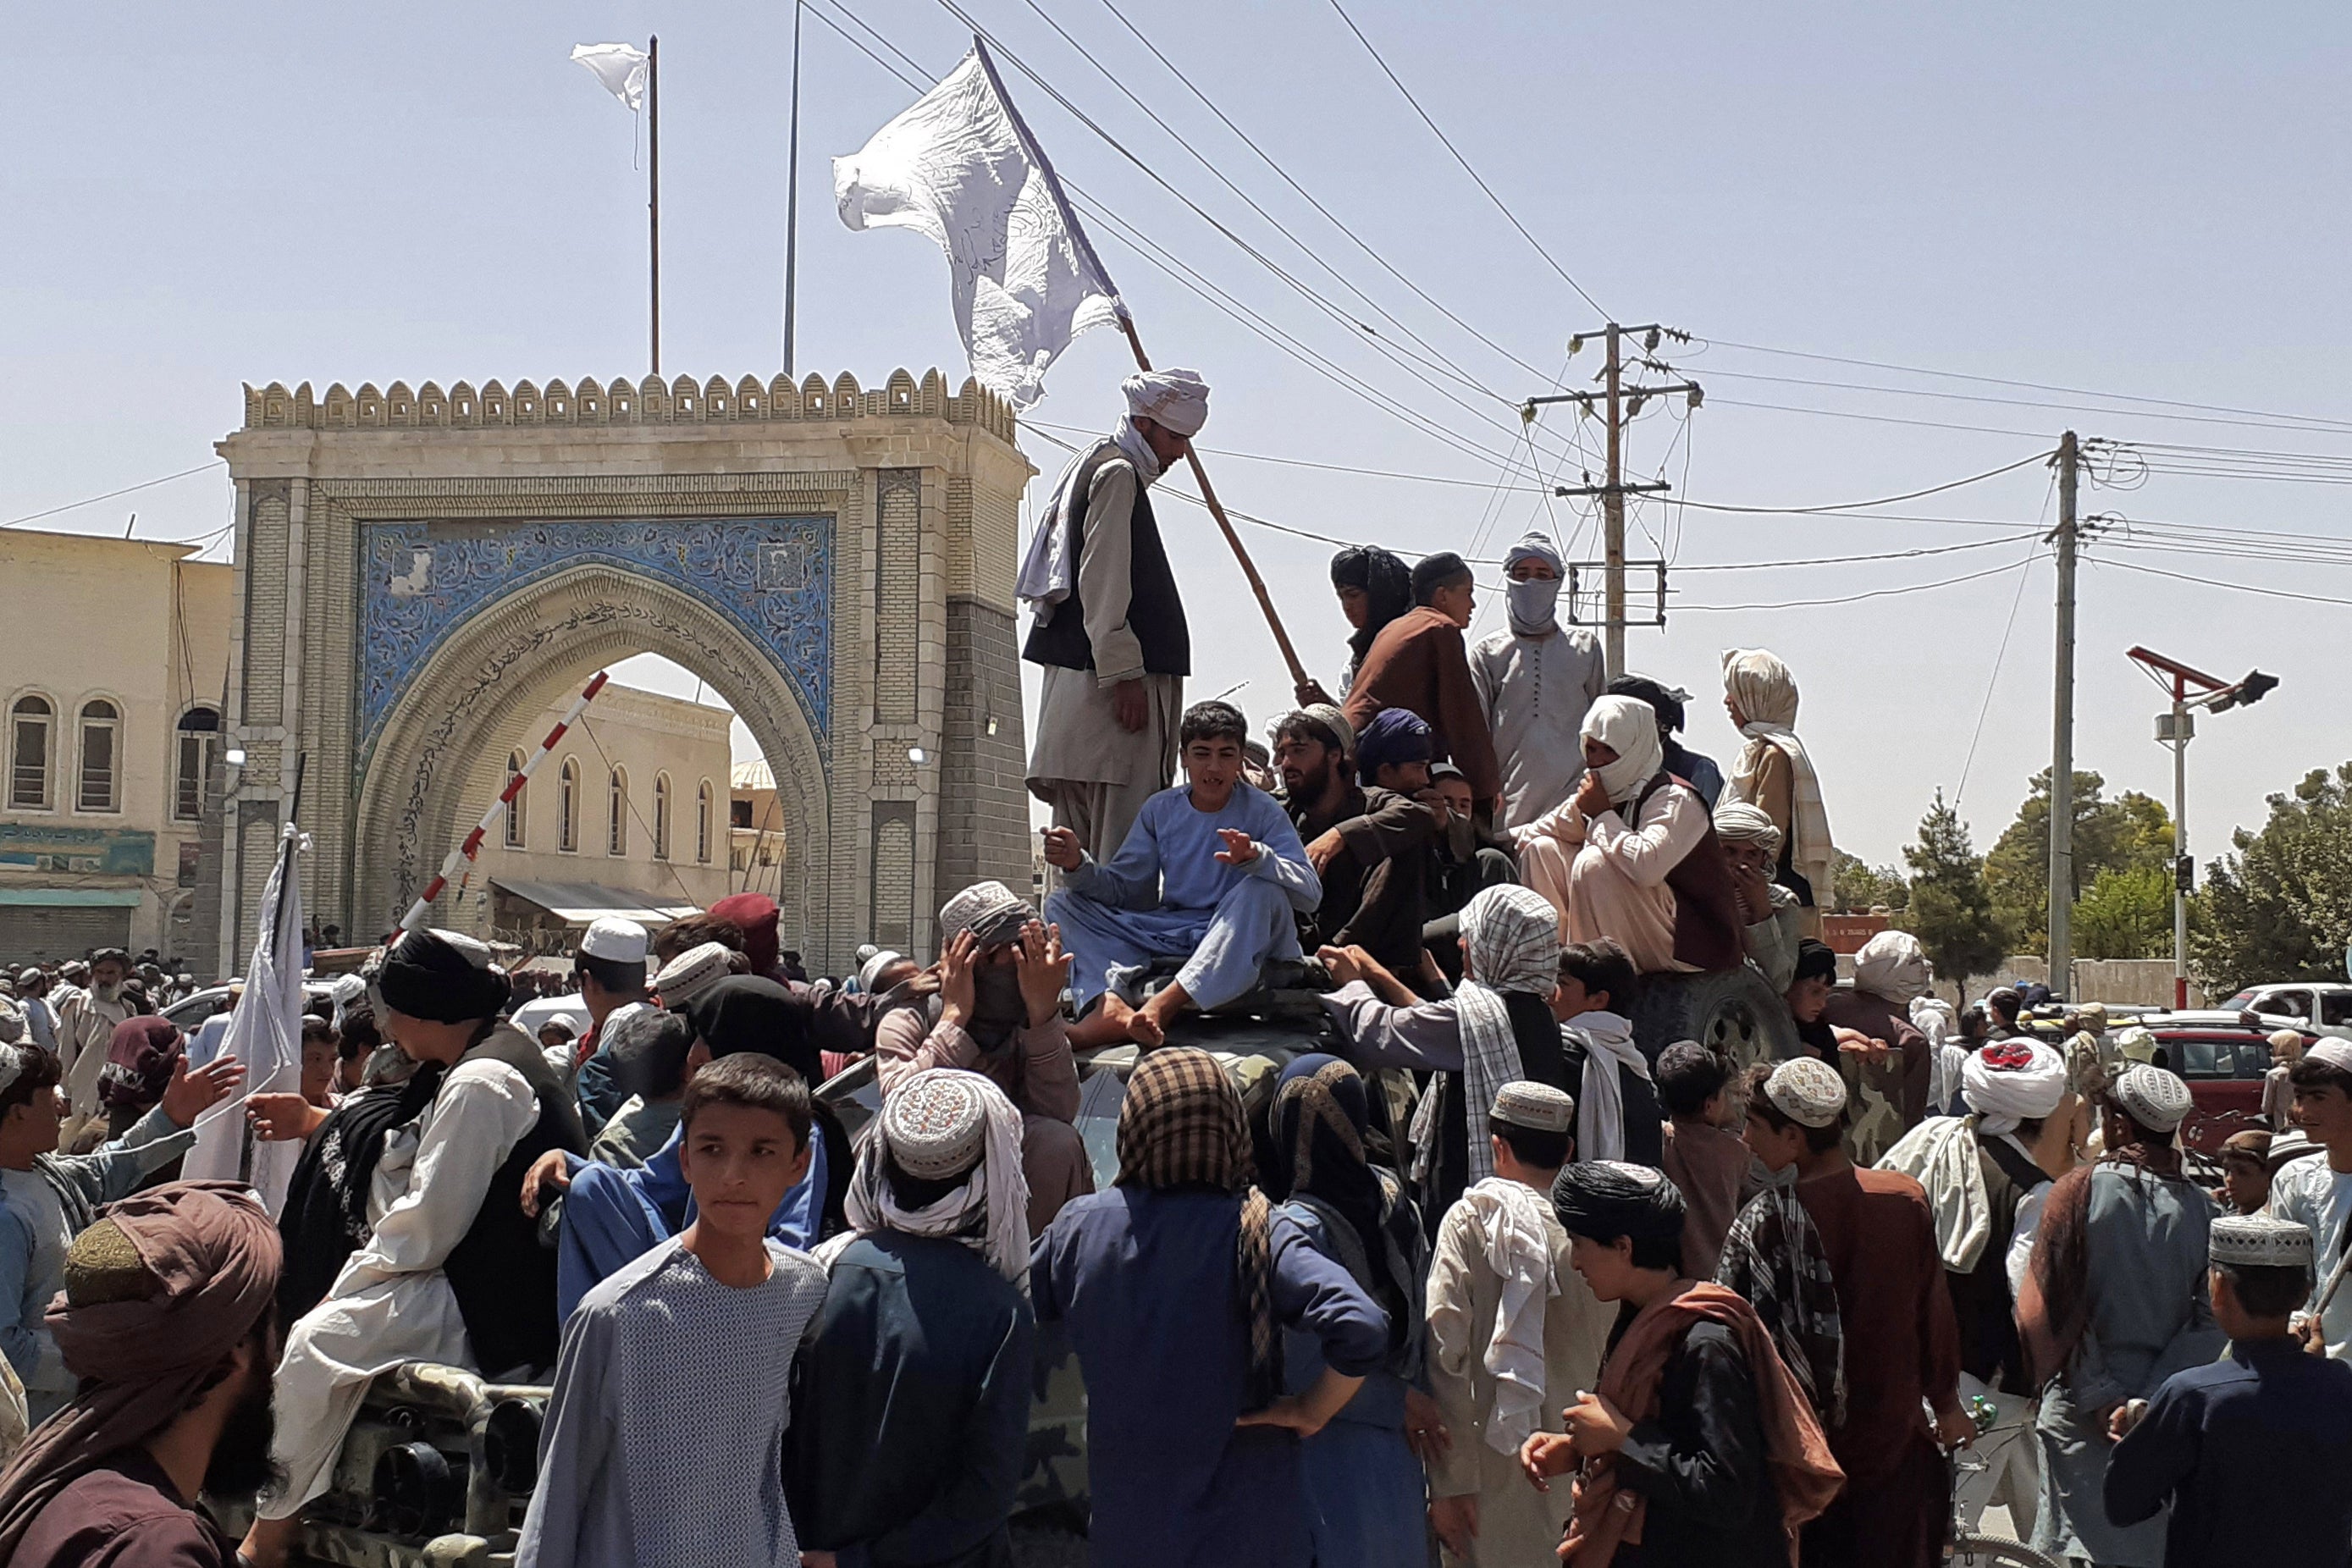 File: Taliban fighters stand on a vehicle along the roadside in Kandahar on 13 August 2021